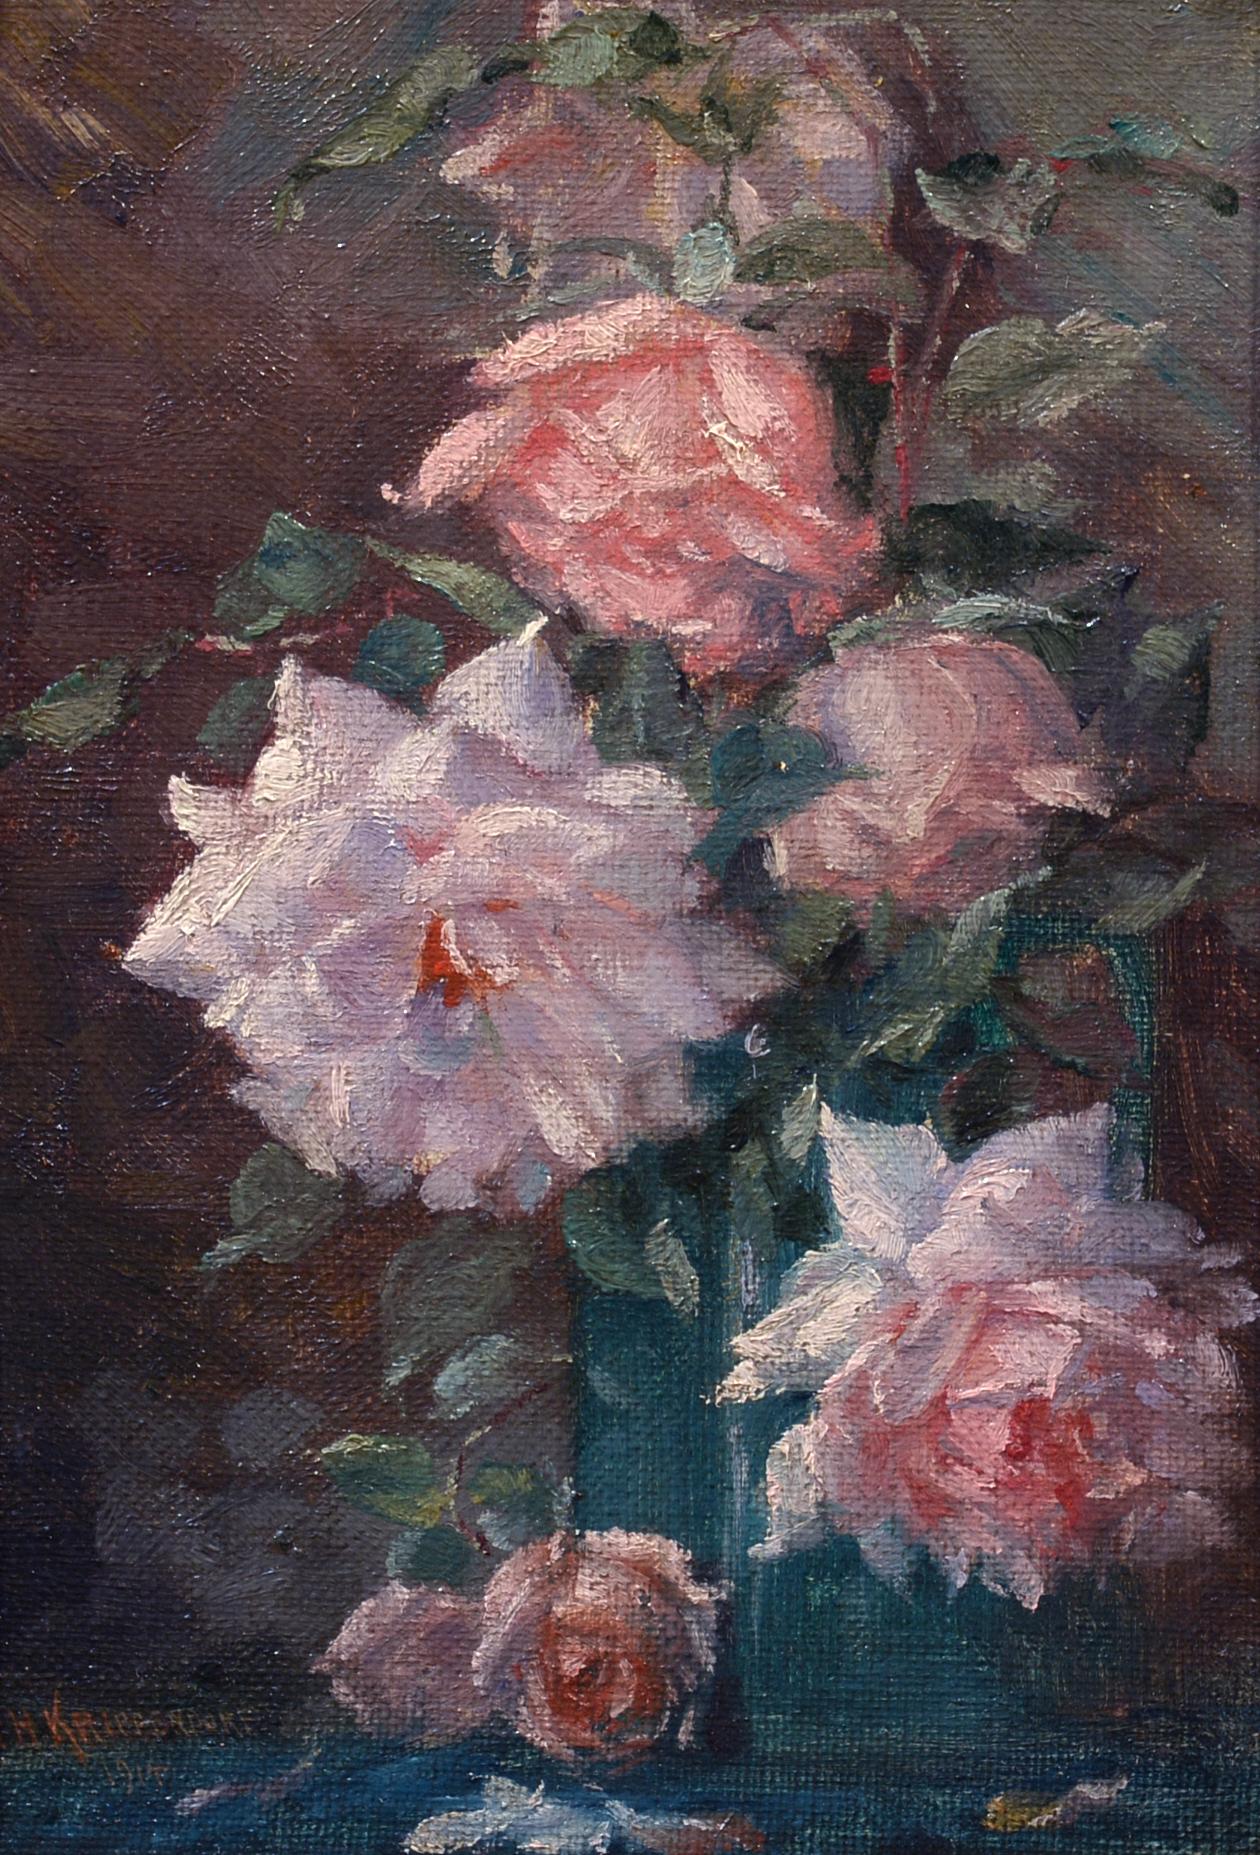 William H. Krippendorf Interior Painting - Still Life with Roses, Impressionist Oil of Flowers in a Blue Vase